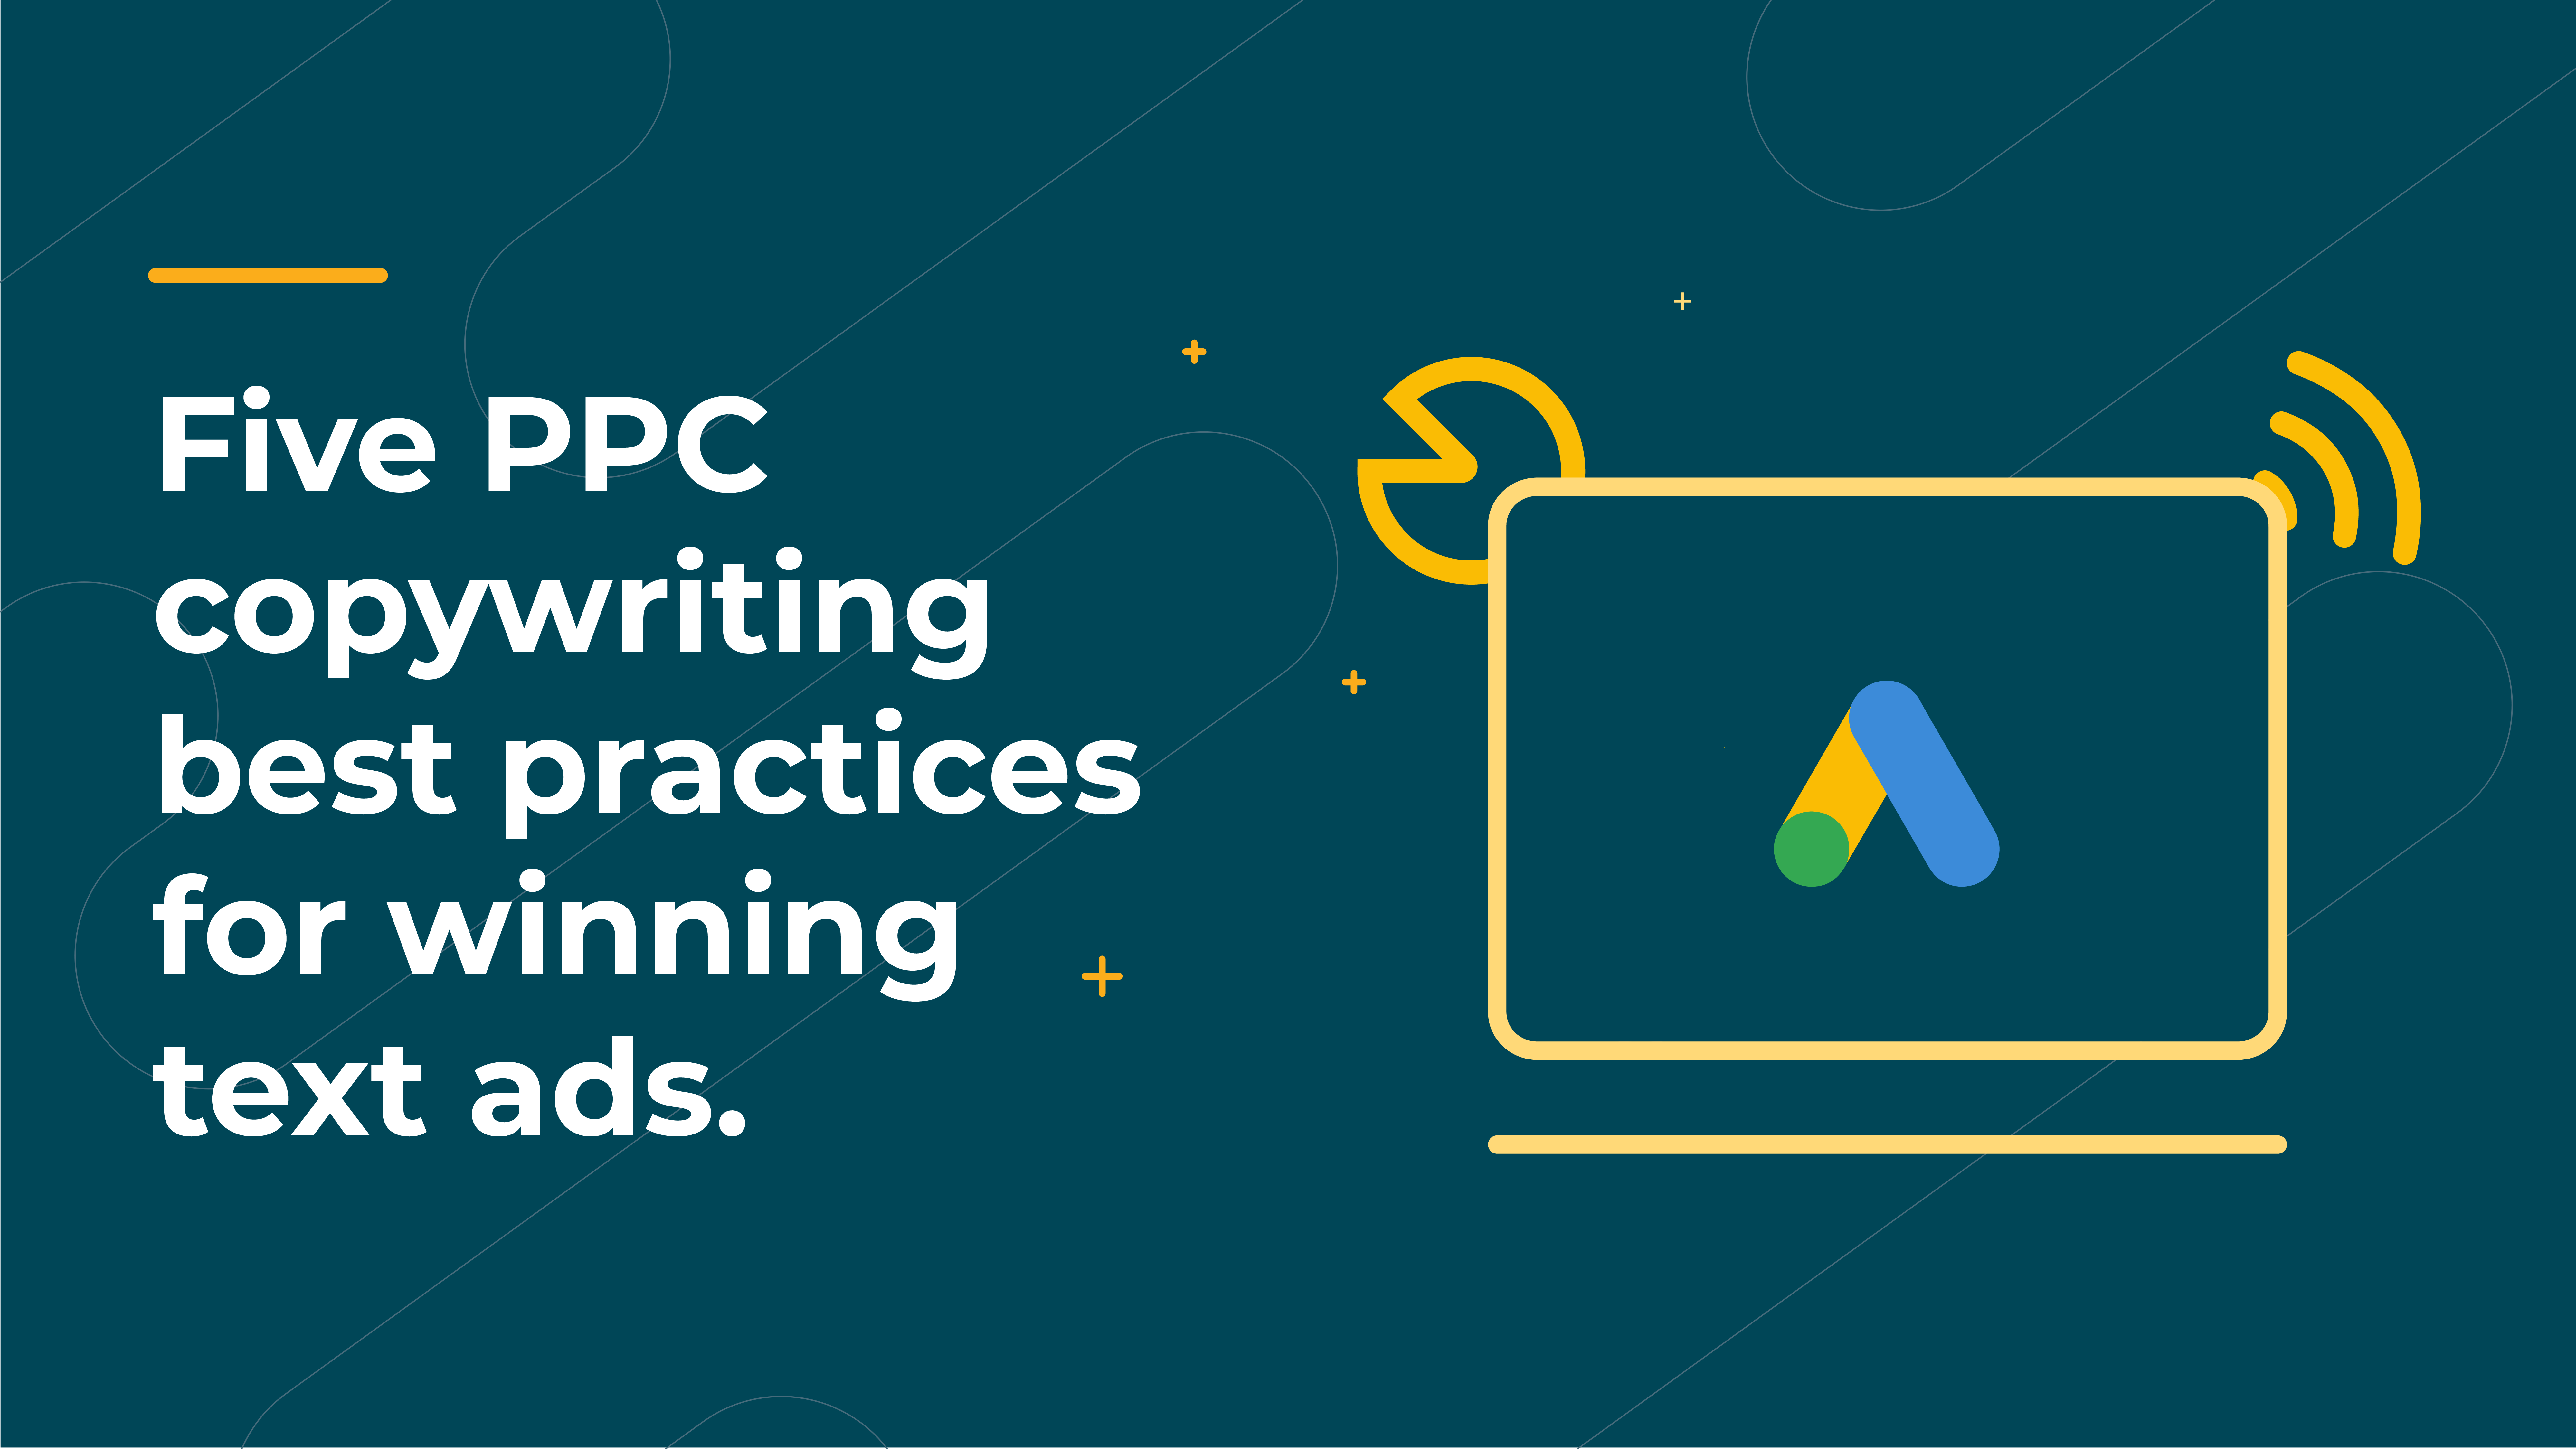 Five PPC copywriting best practices for winning text ads